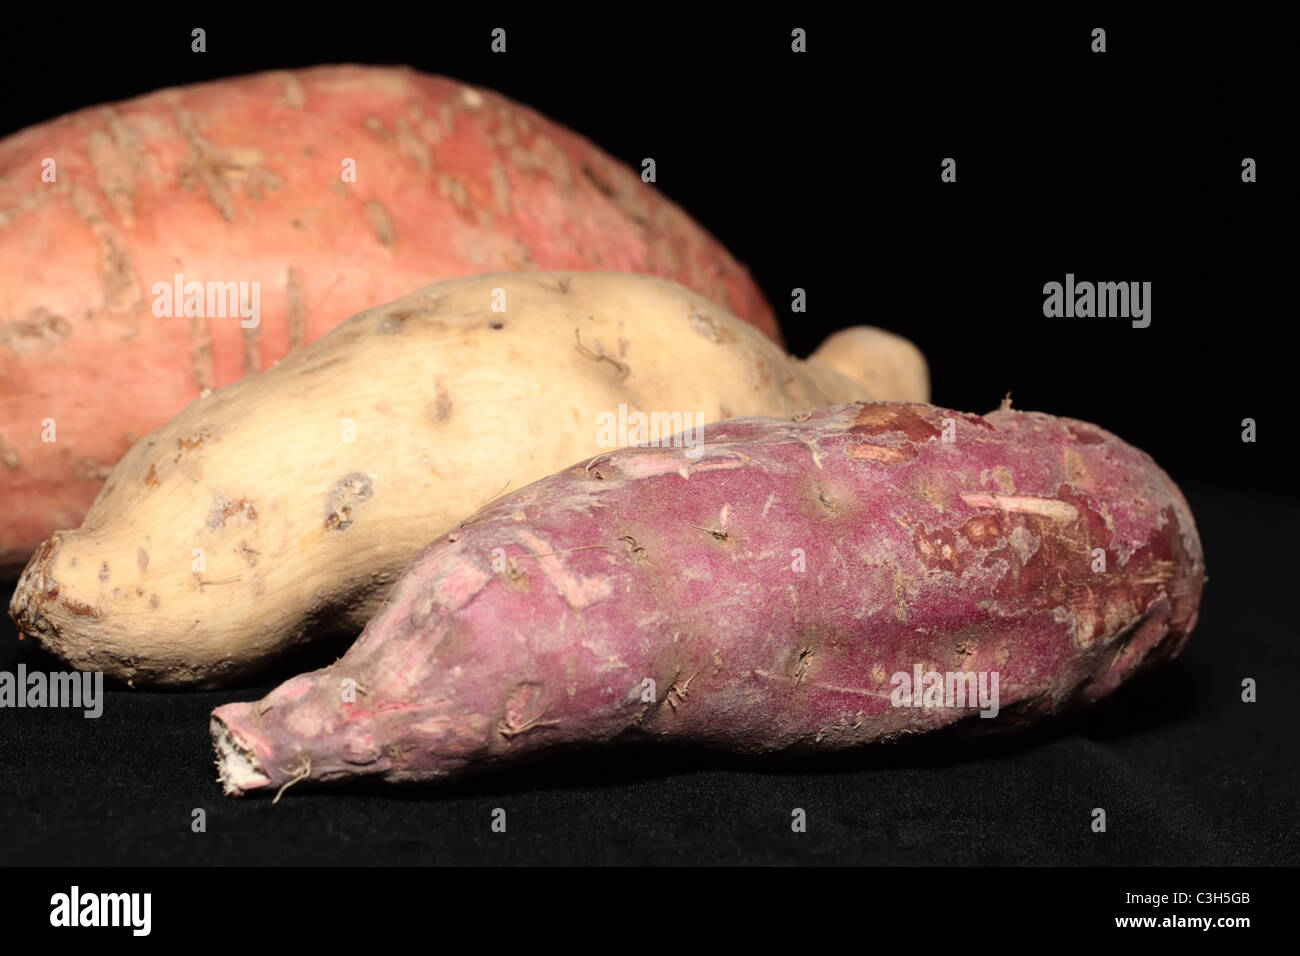 Three Kinds of Sweet Potatoes that is purple skin with white flesh, white skin with purple flesh and the normal orange sweet one Stock Photo